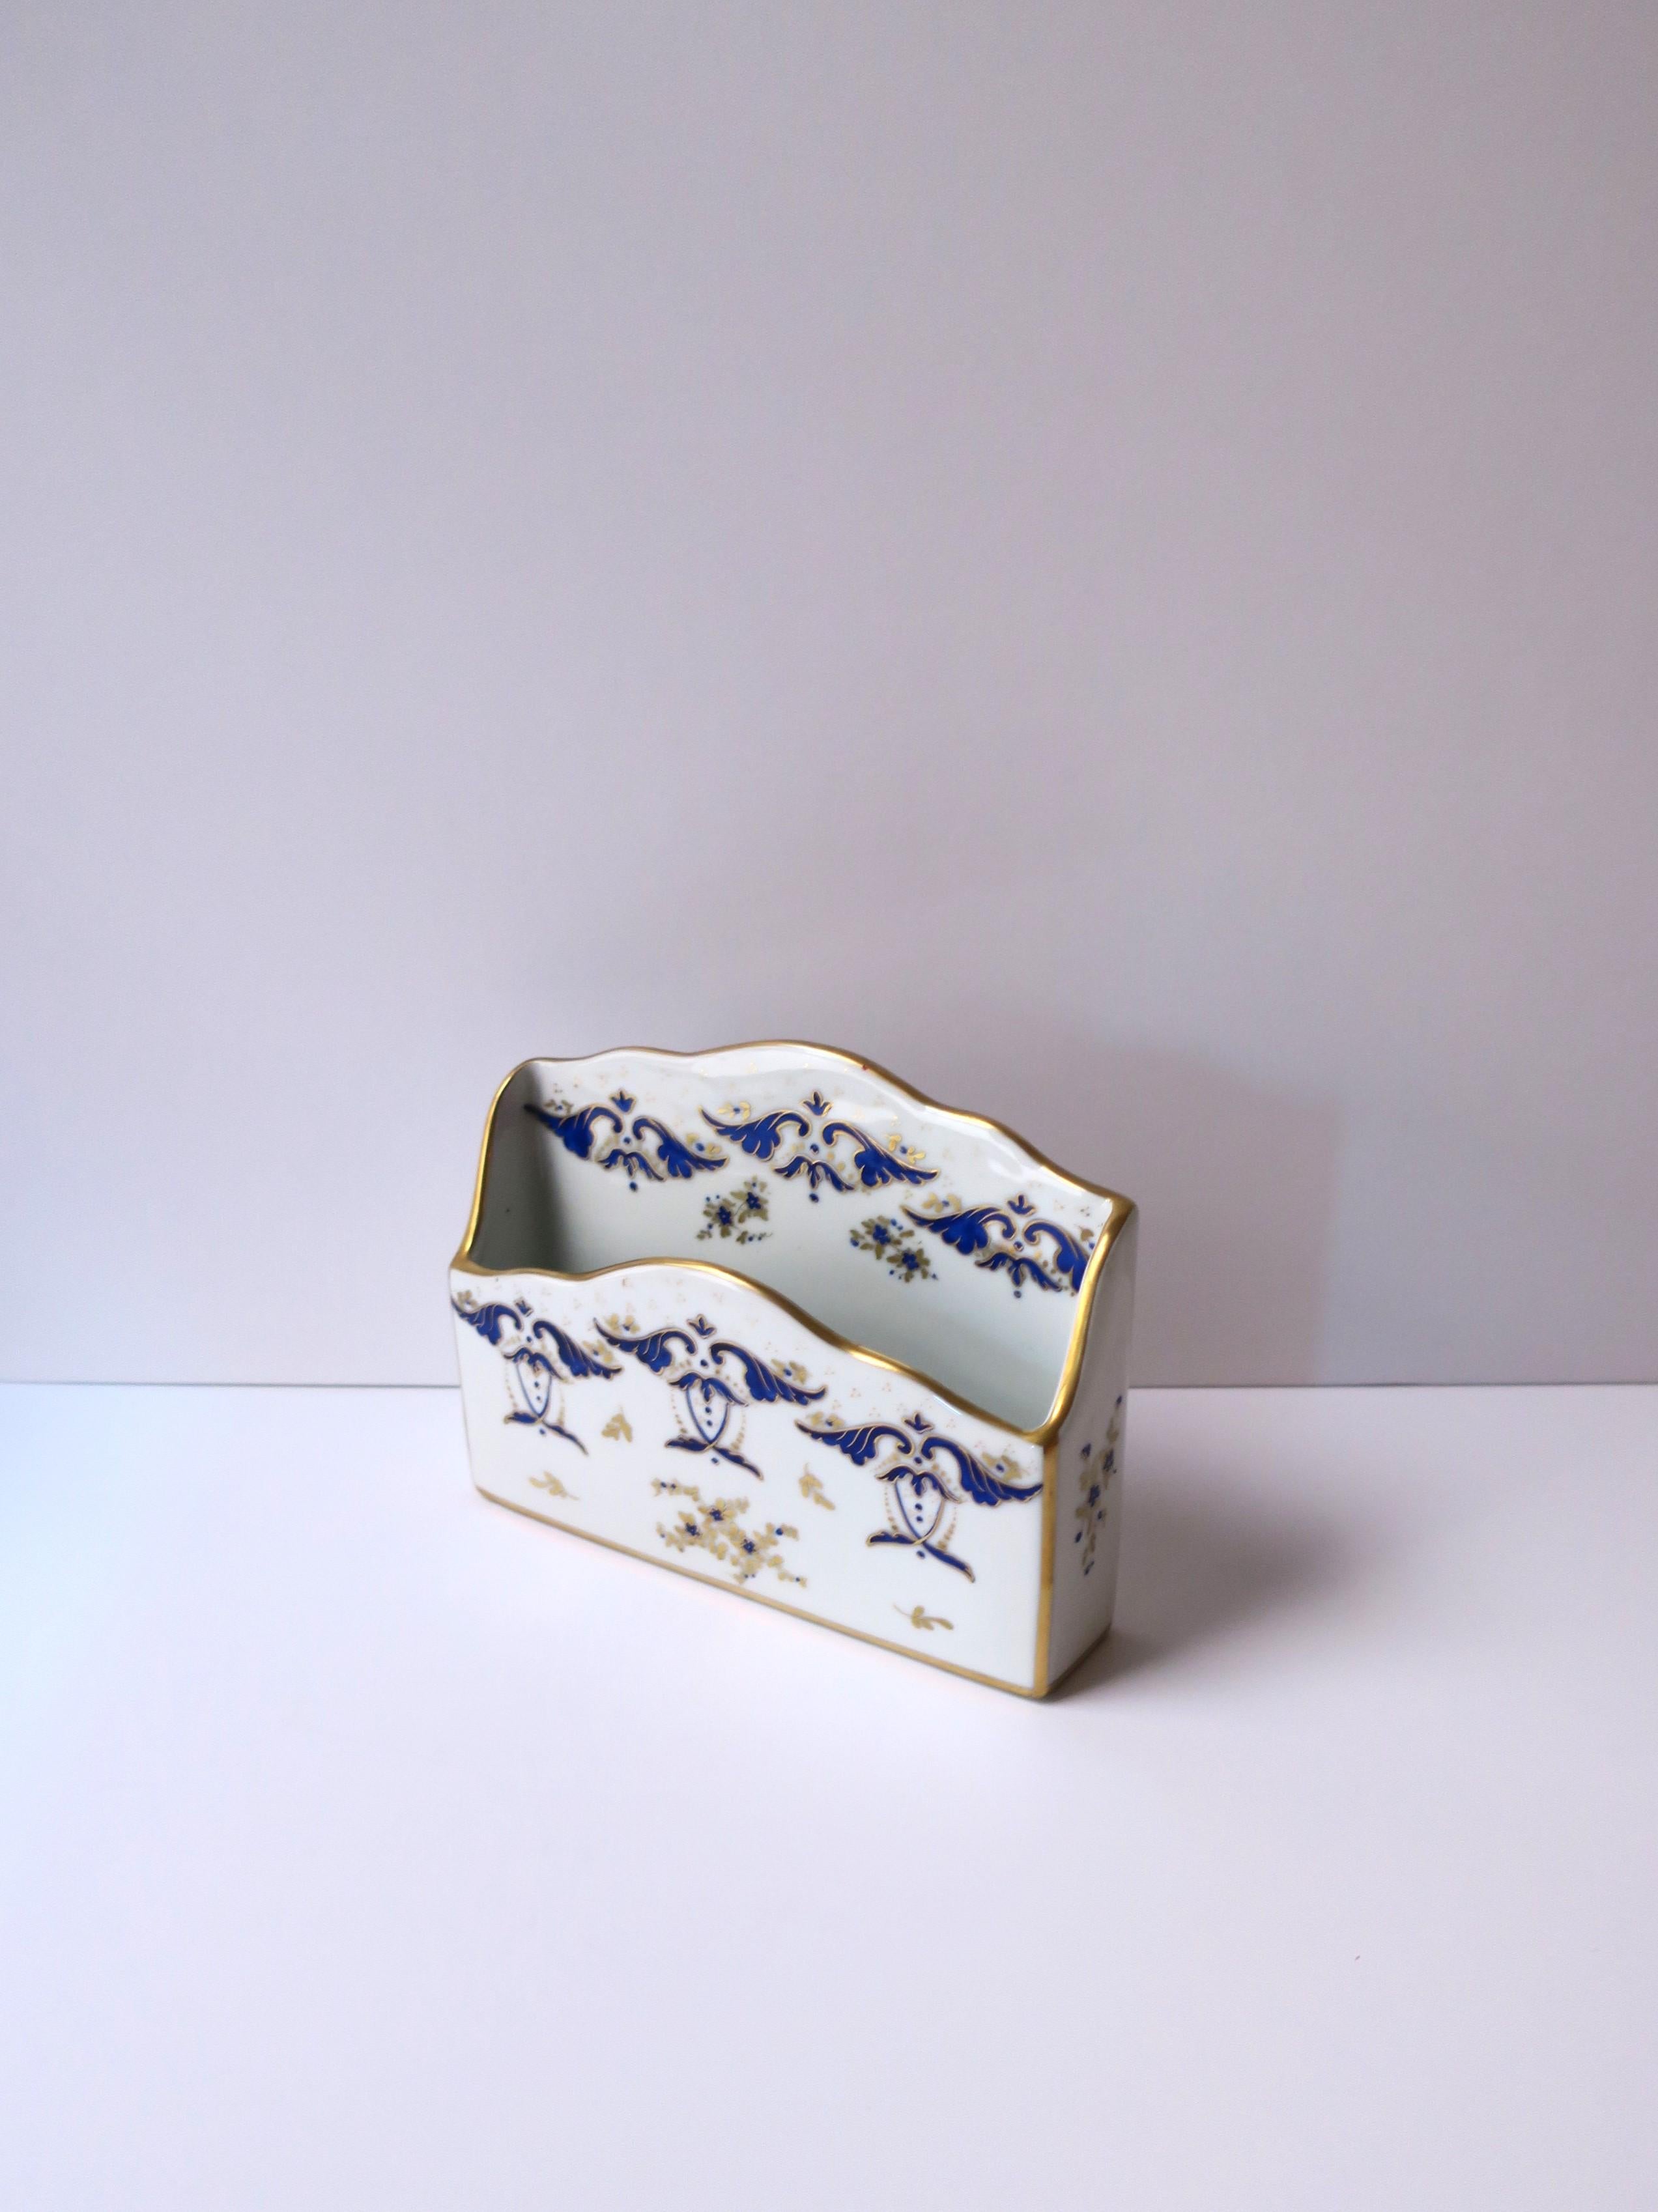 A French white porcelain desk letter or mail holder with small flowers and leaves in the Rococo design style, circa mid-20th century, Paris, France. Piece with scalloped edge is hand-painted in blue and gold hues on front, sides and back, with